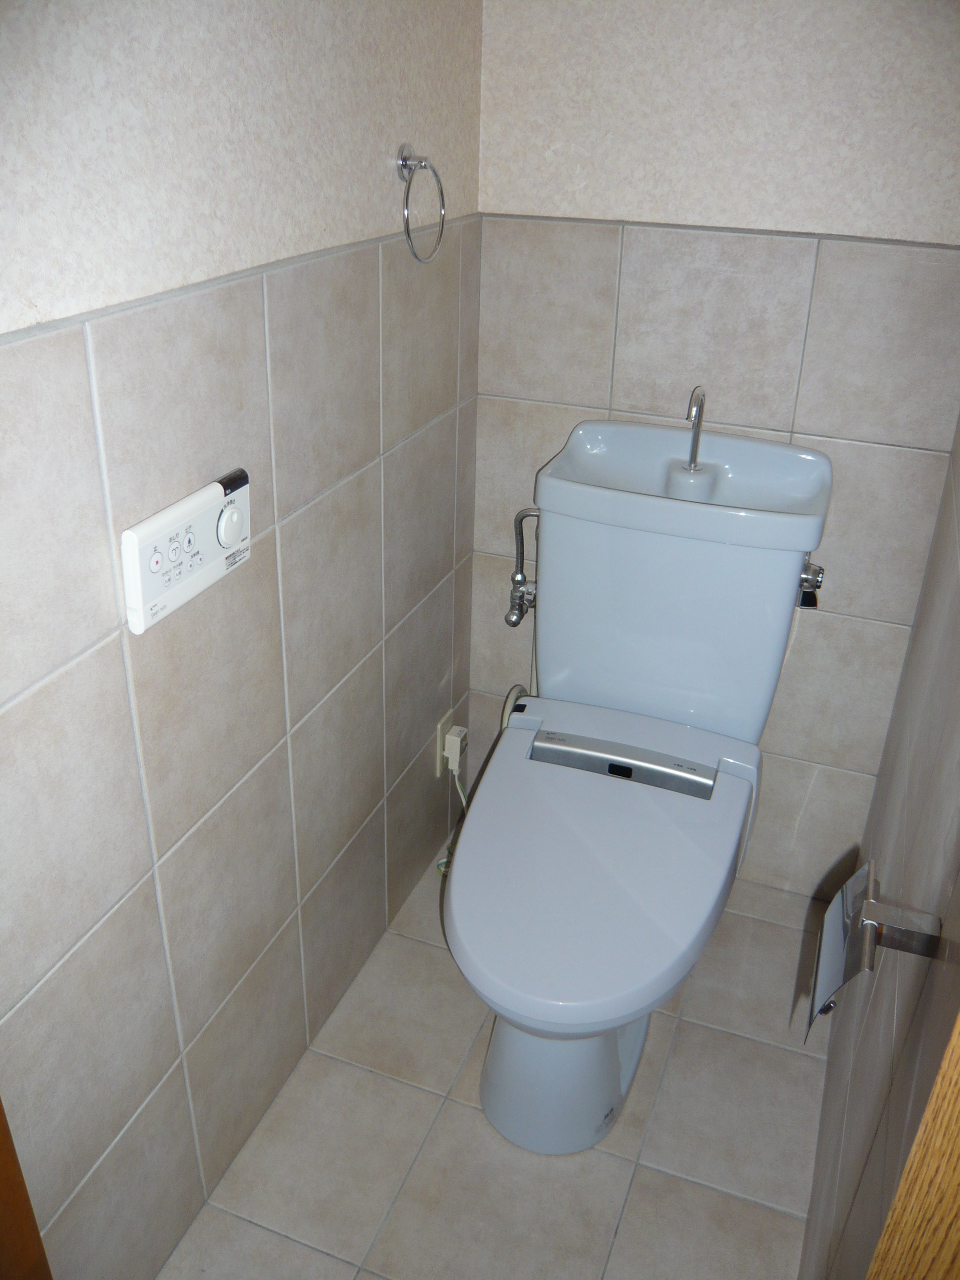 Toilet. It is the bidet of wall switch! 